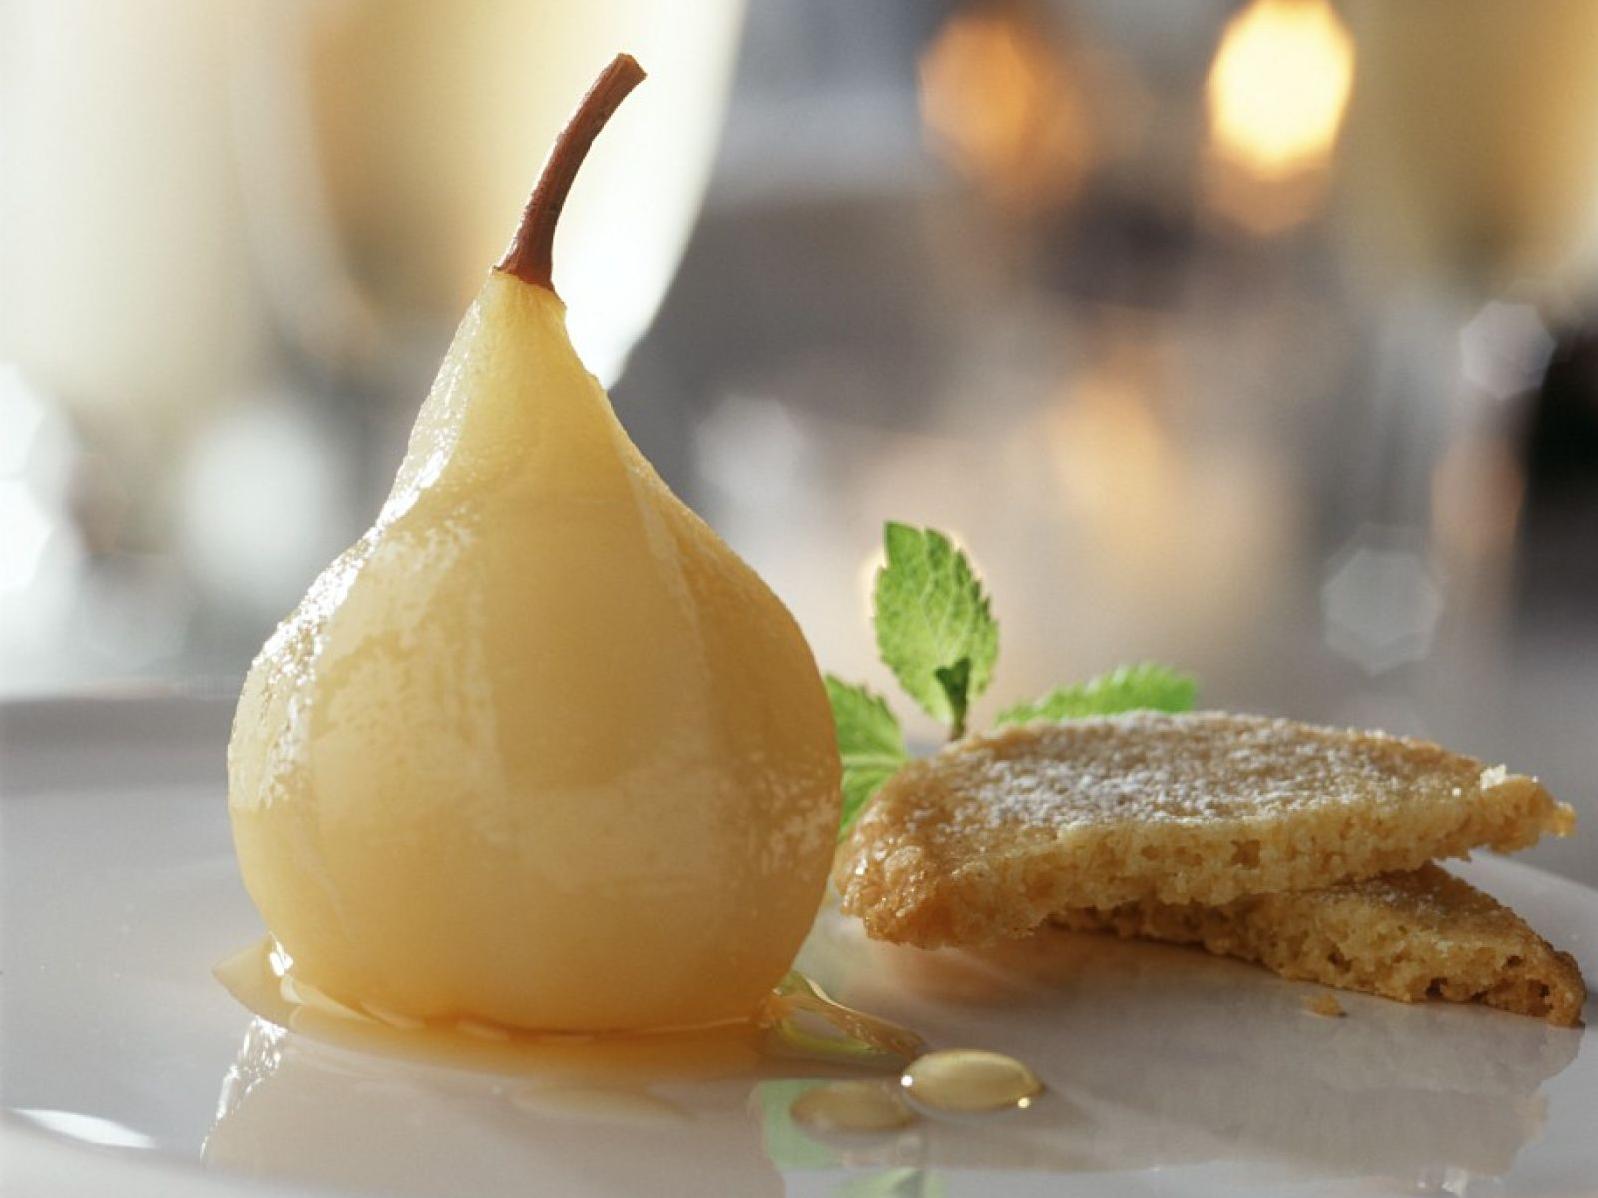  Let these poached pears achieve next-level status with just a few simple ingredients!